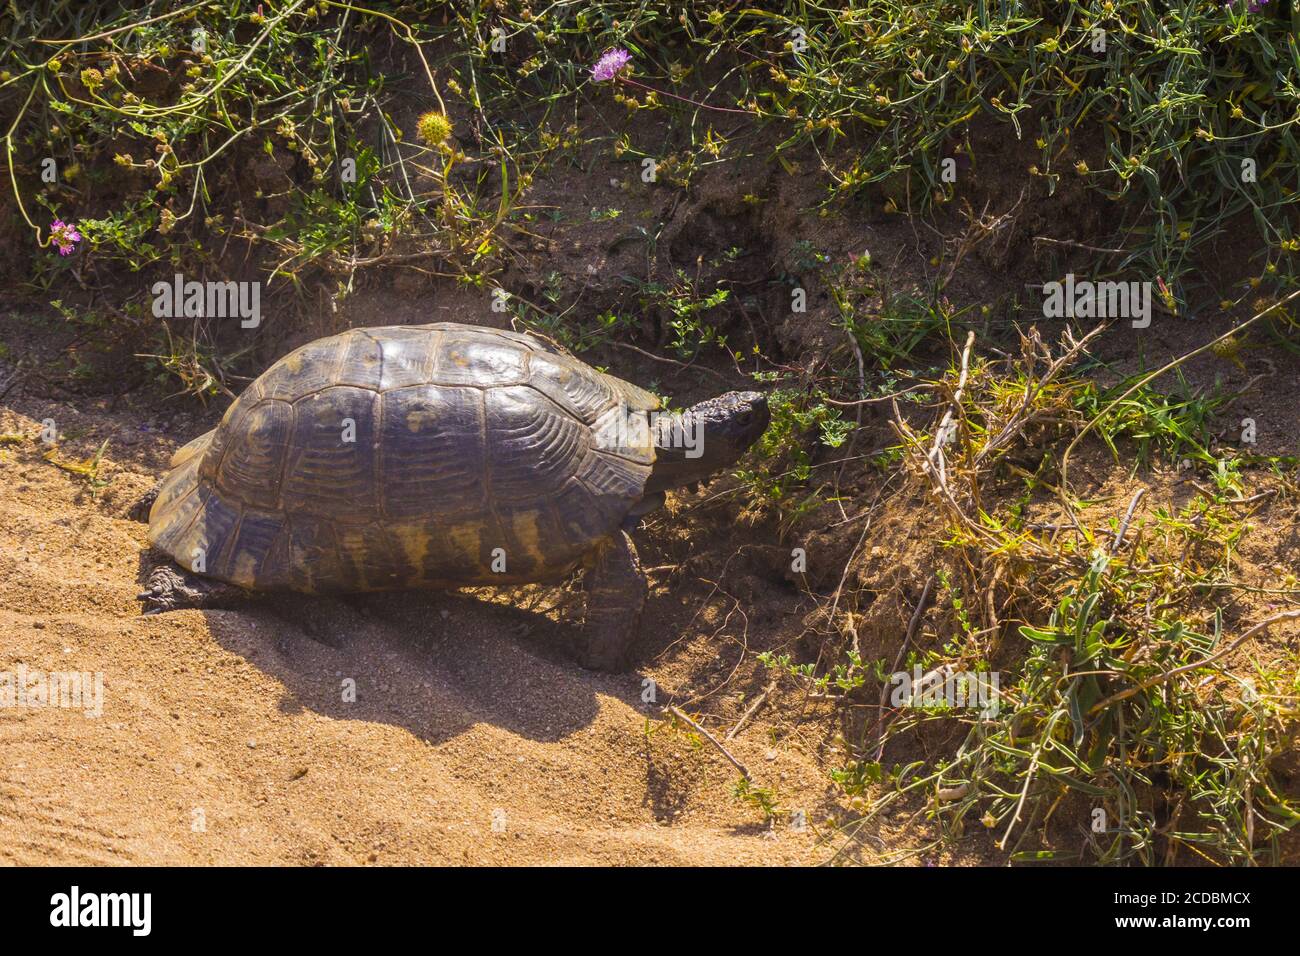 Green turtle in Italy Stock Photo